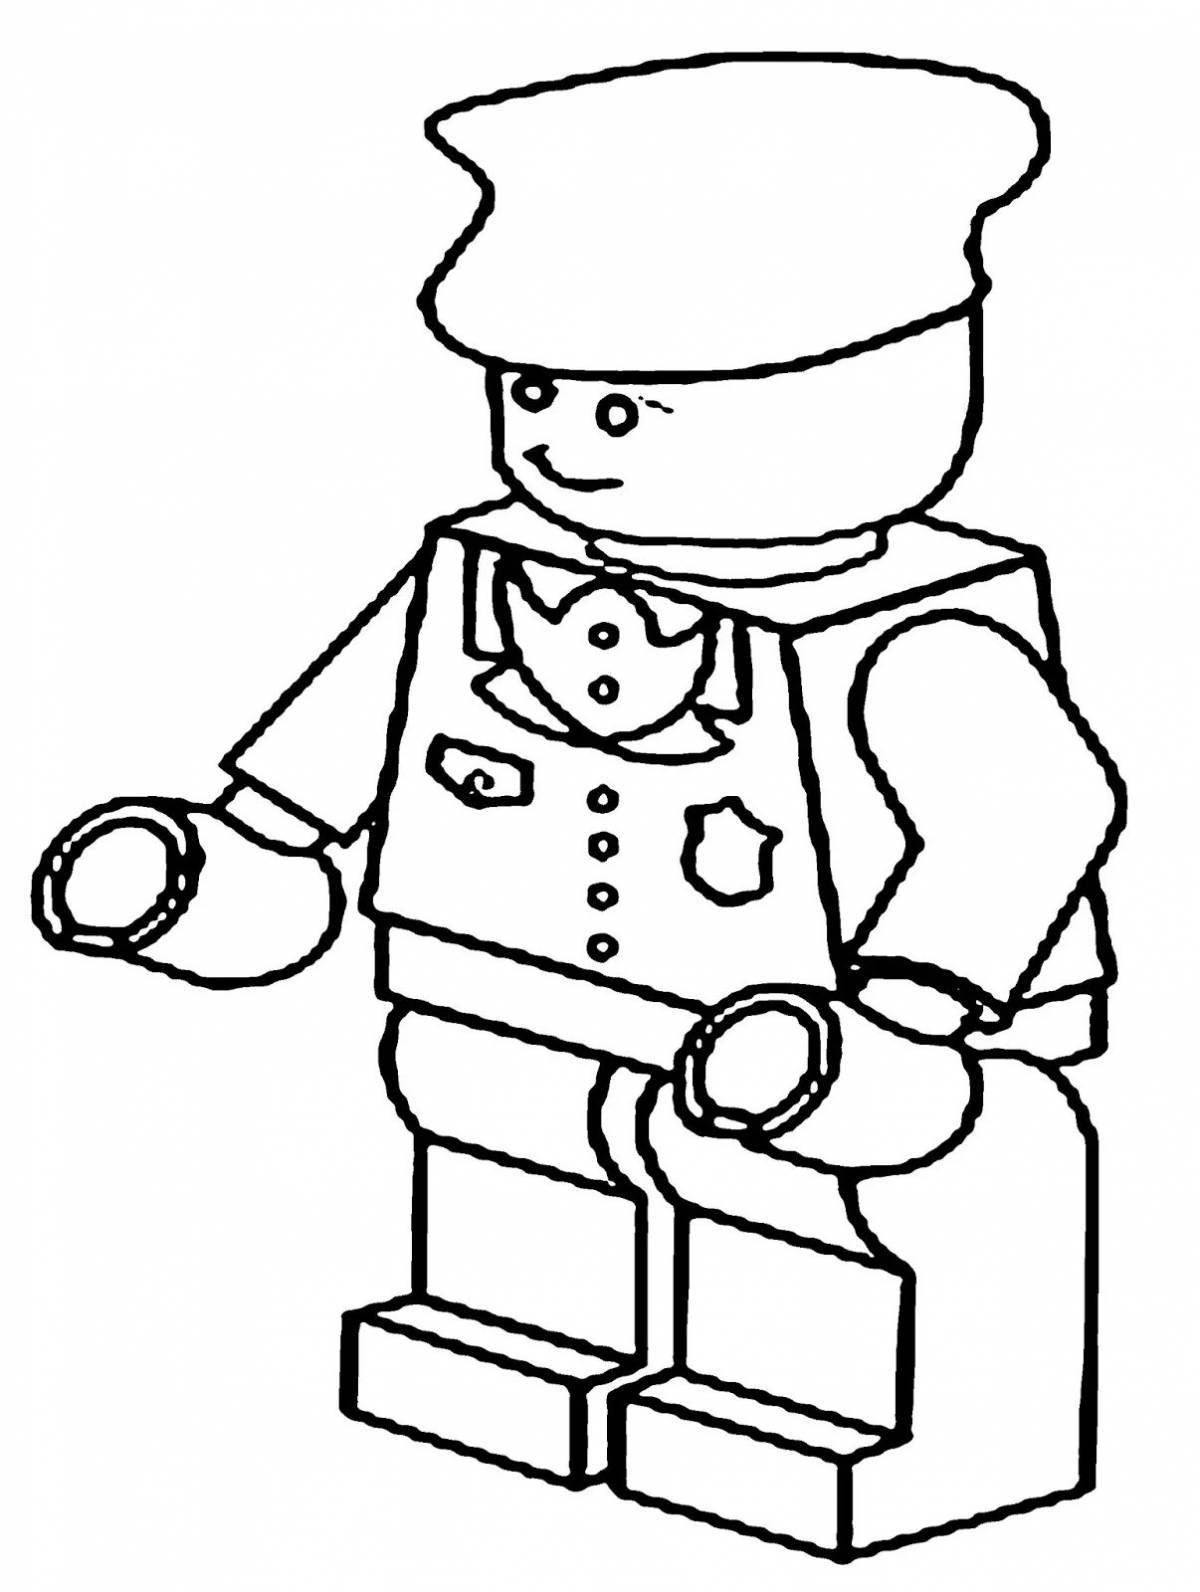 Lego toy soldiers coloring pages